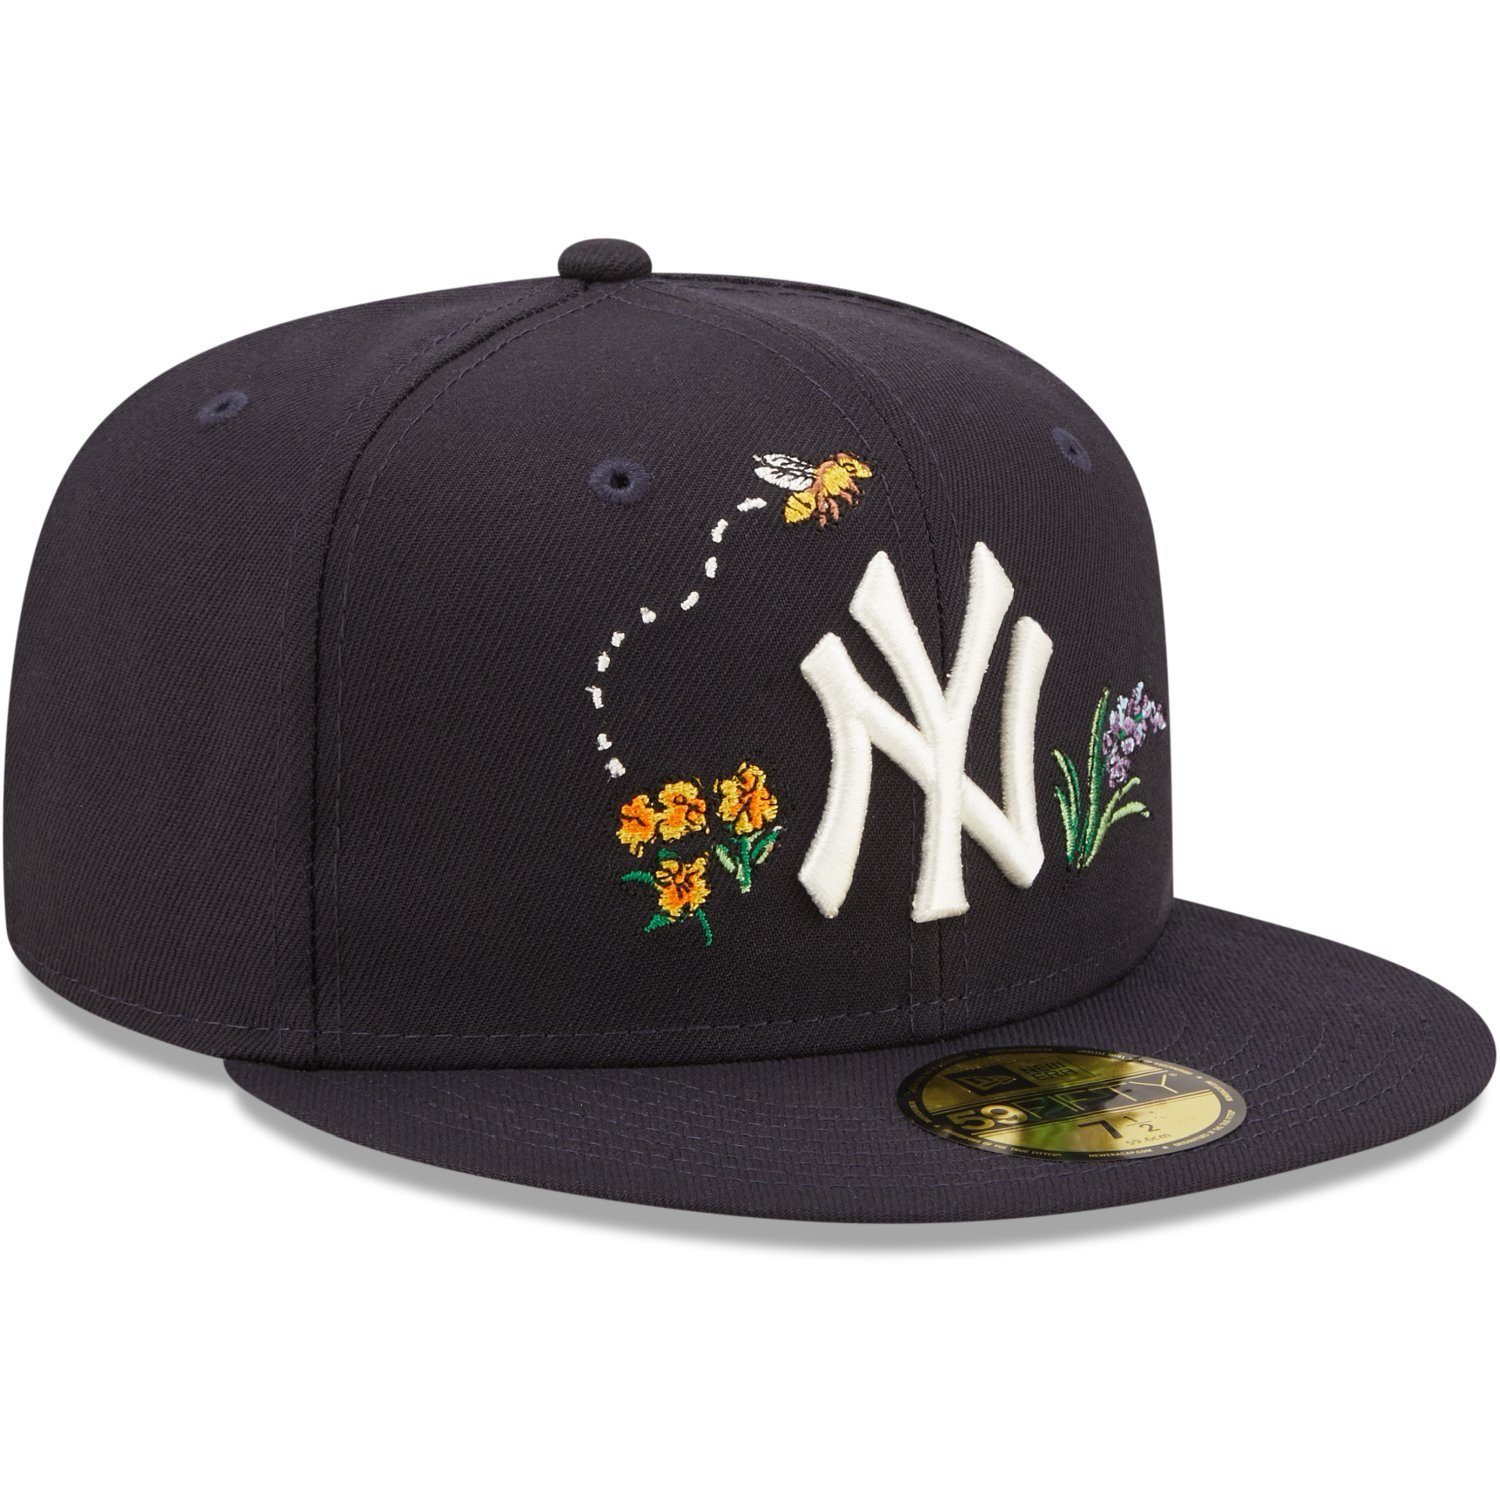 Era WATER New Fitted York FLORAL Cap Yankees New 59Fifty